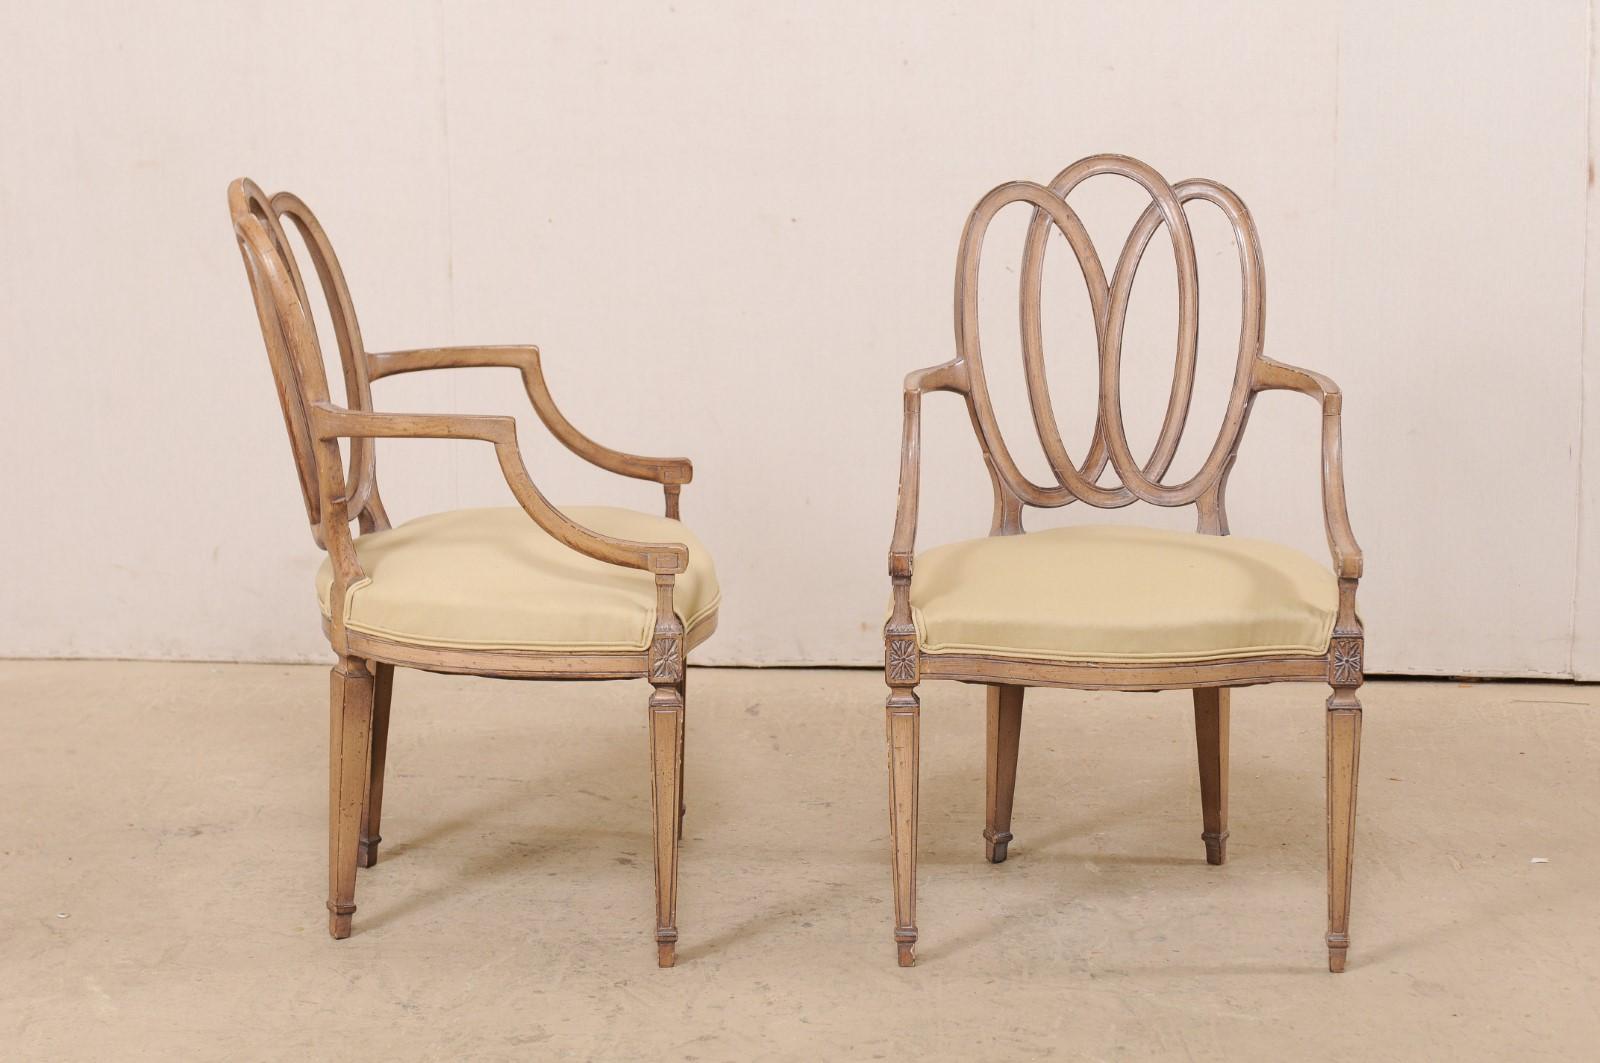 Italian Pair of Carved-Wood Armchairs with Upholstered Seats, Mid-20th Century In Good Condition For Sale In Atlanta, GA